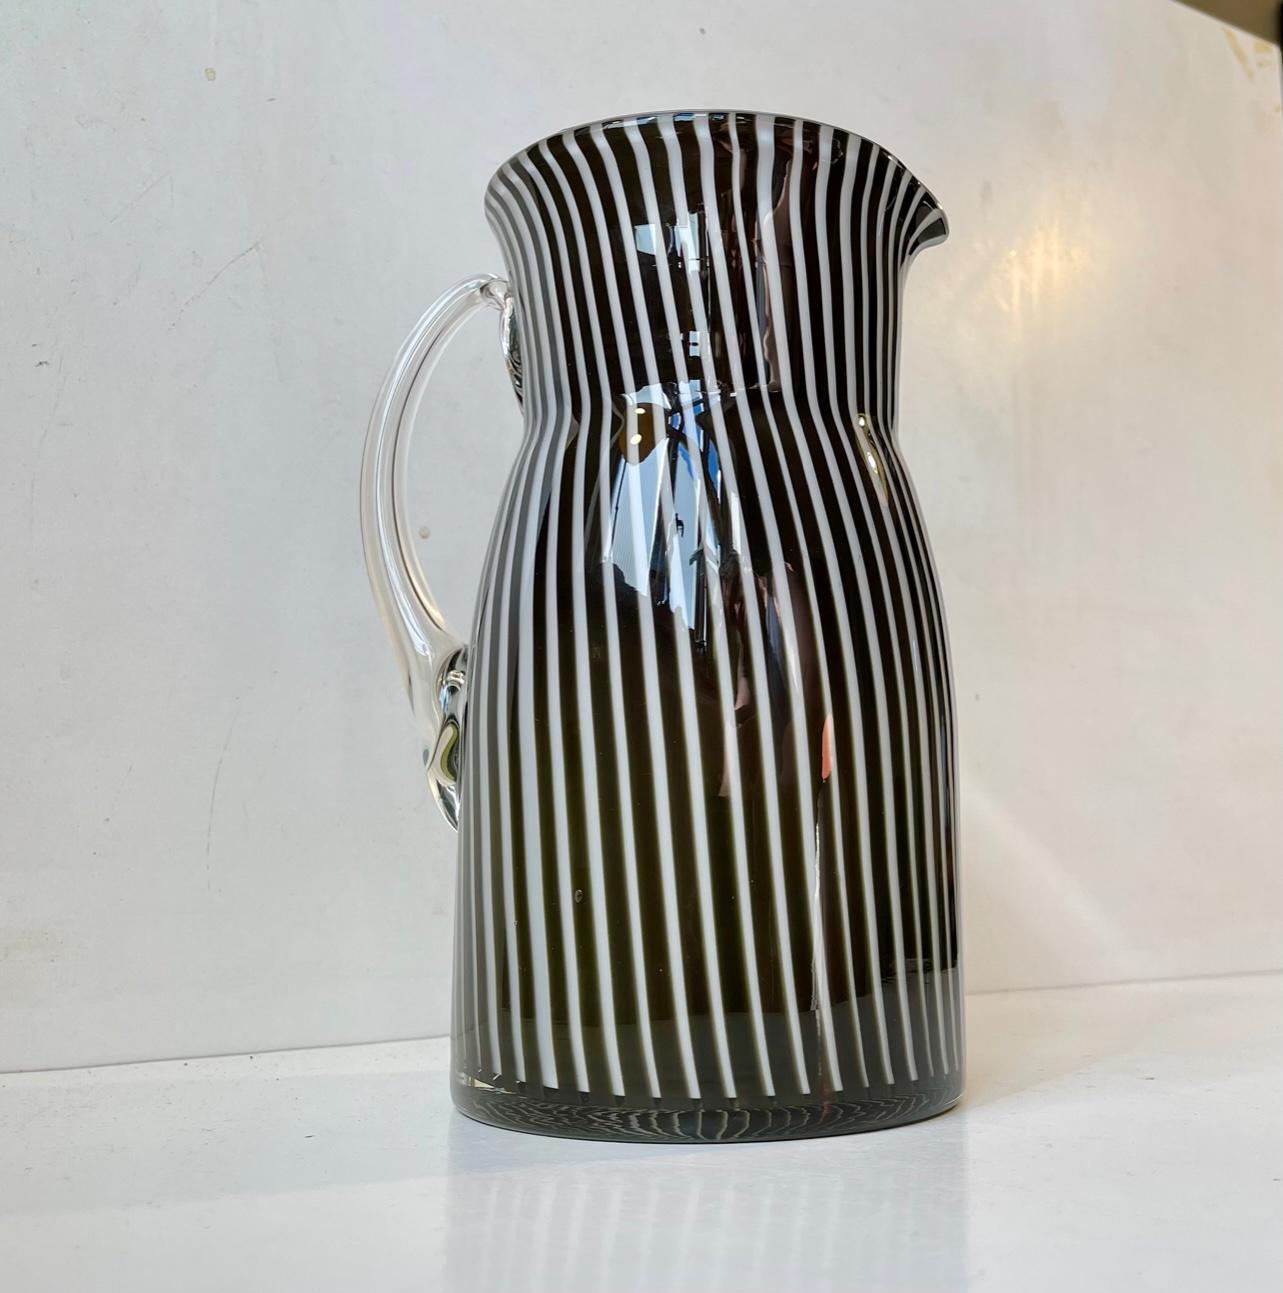 Handblown Venetian Glass jug/pitcher for milk or water. It is executed in cased black and white pin-striped glass and features opaline glass to its interior. Made in Murano Italy circa 1980-85. Beautiful, clean and intact vintage condition.